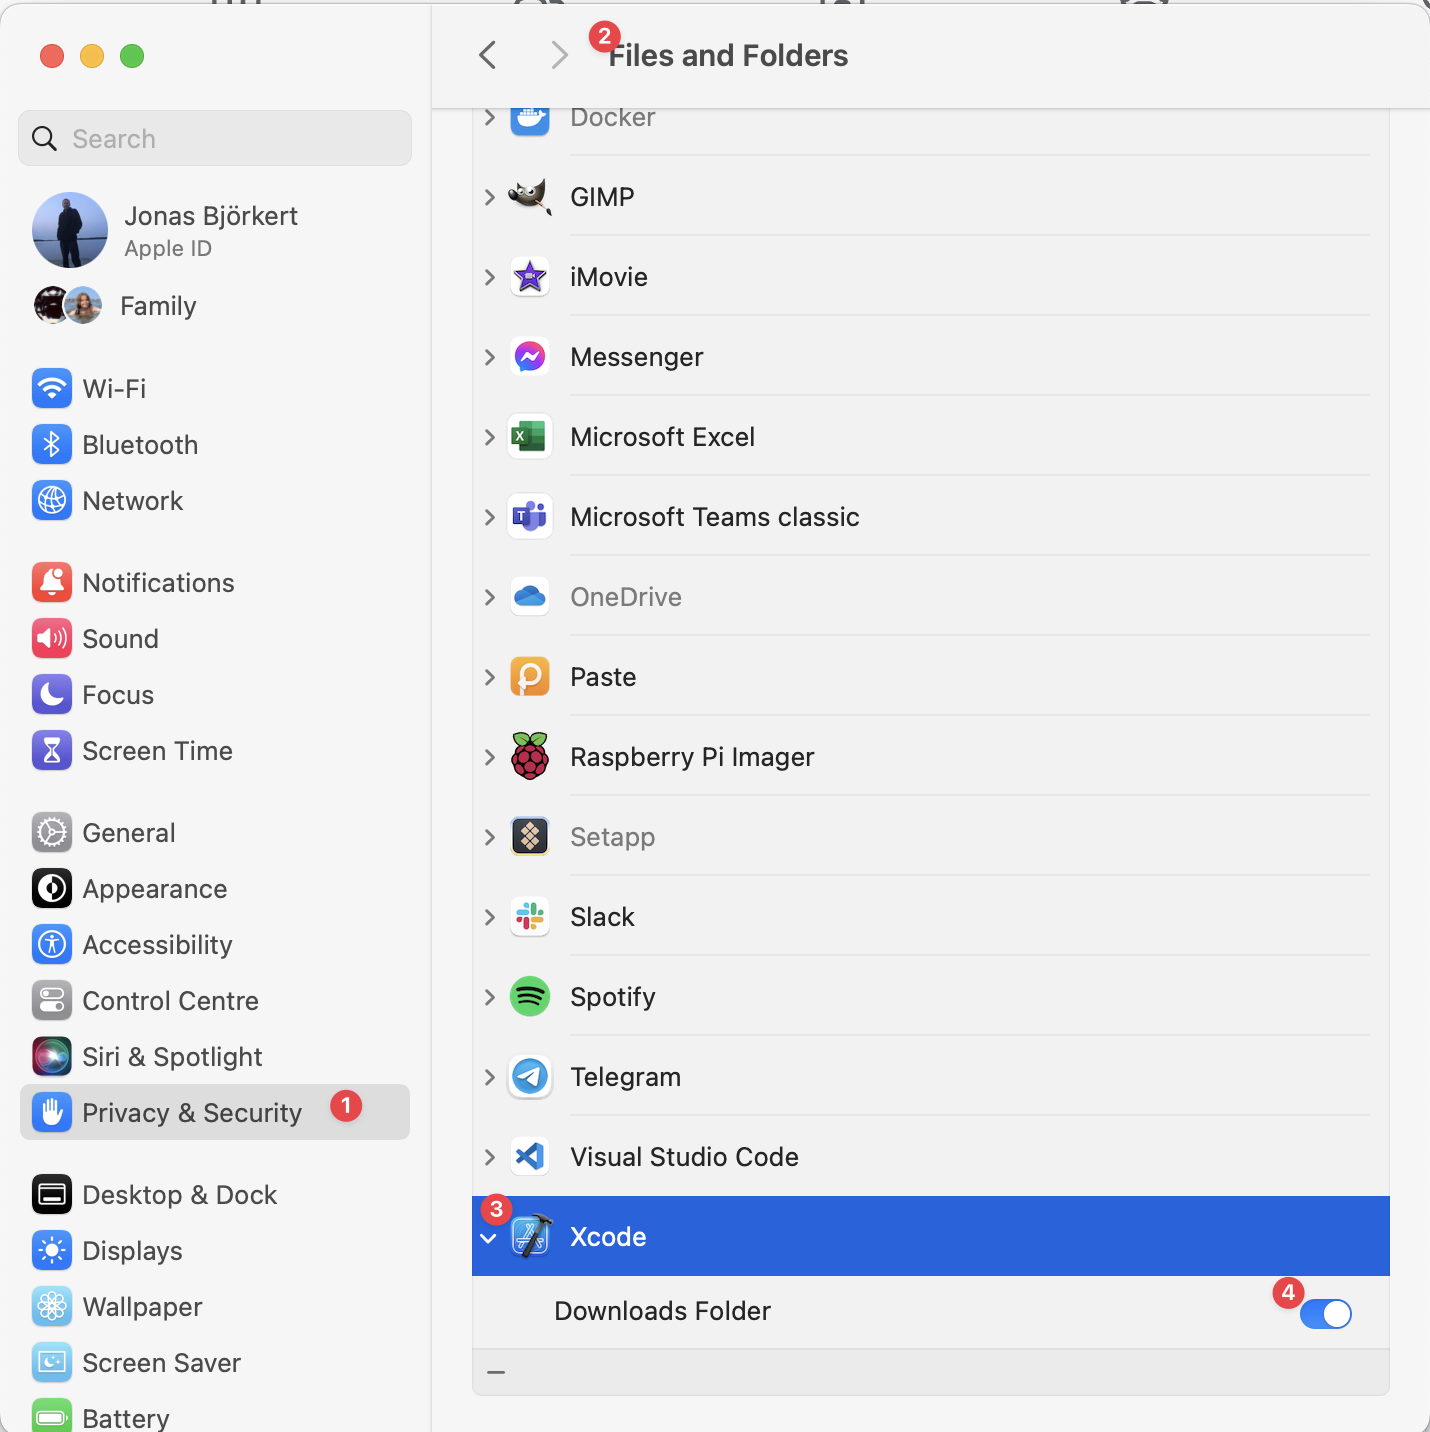 check privacy settings for xcode access to downloads folder